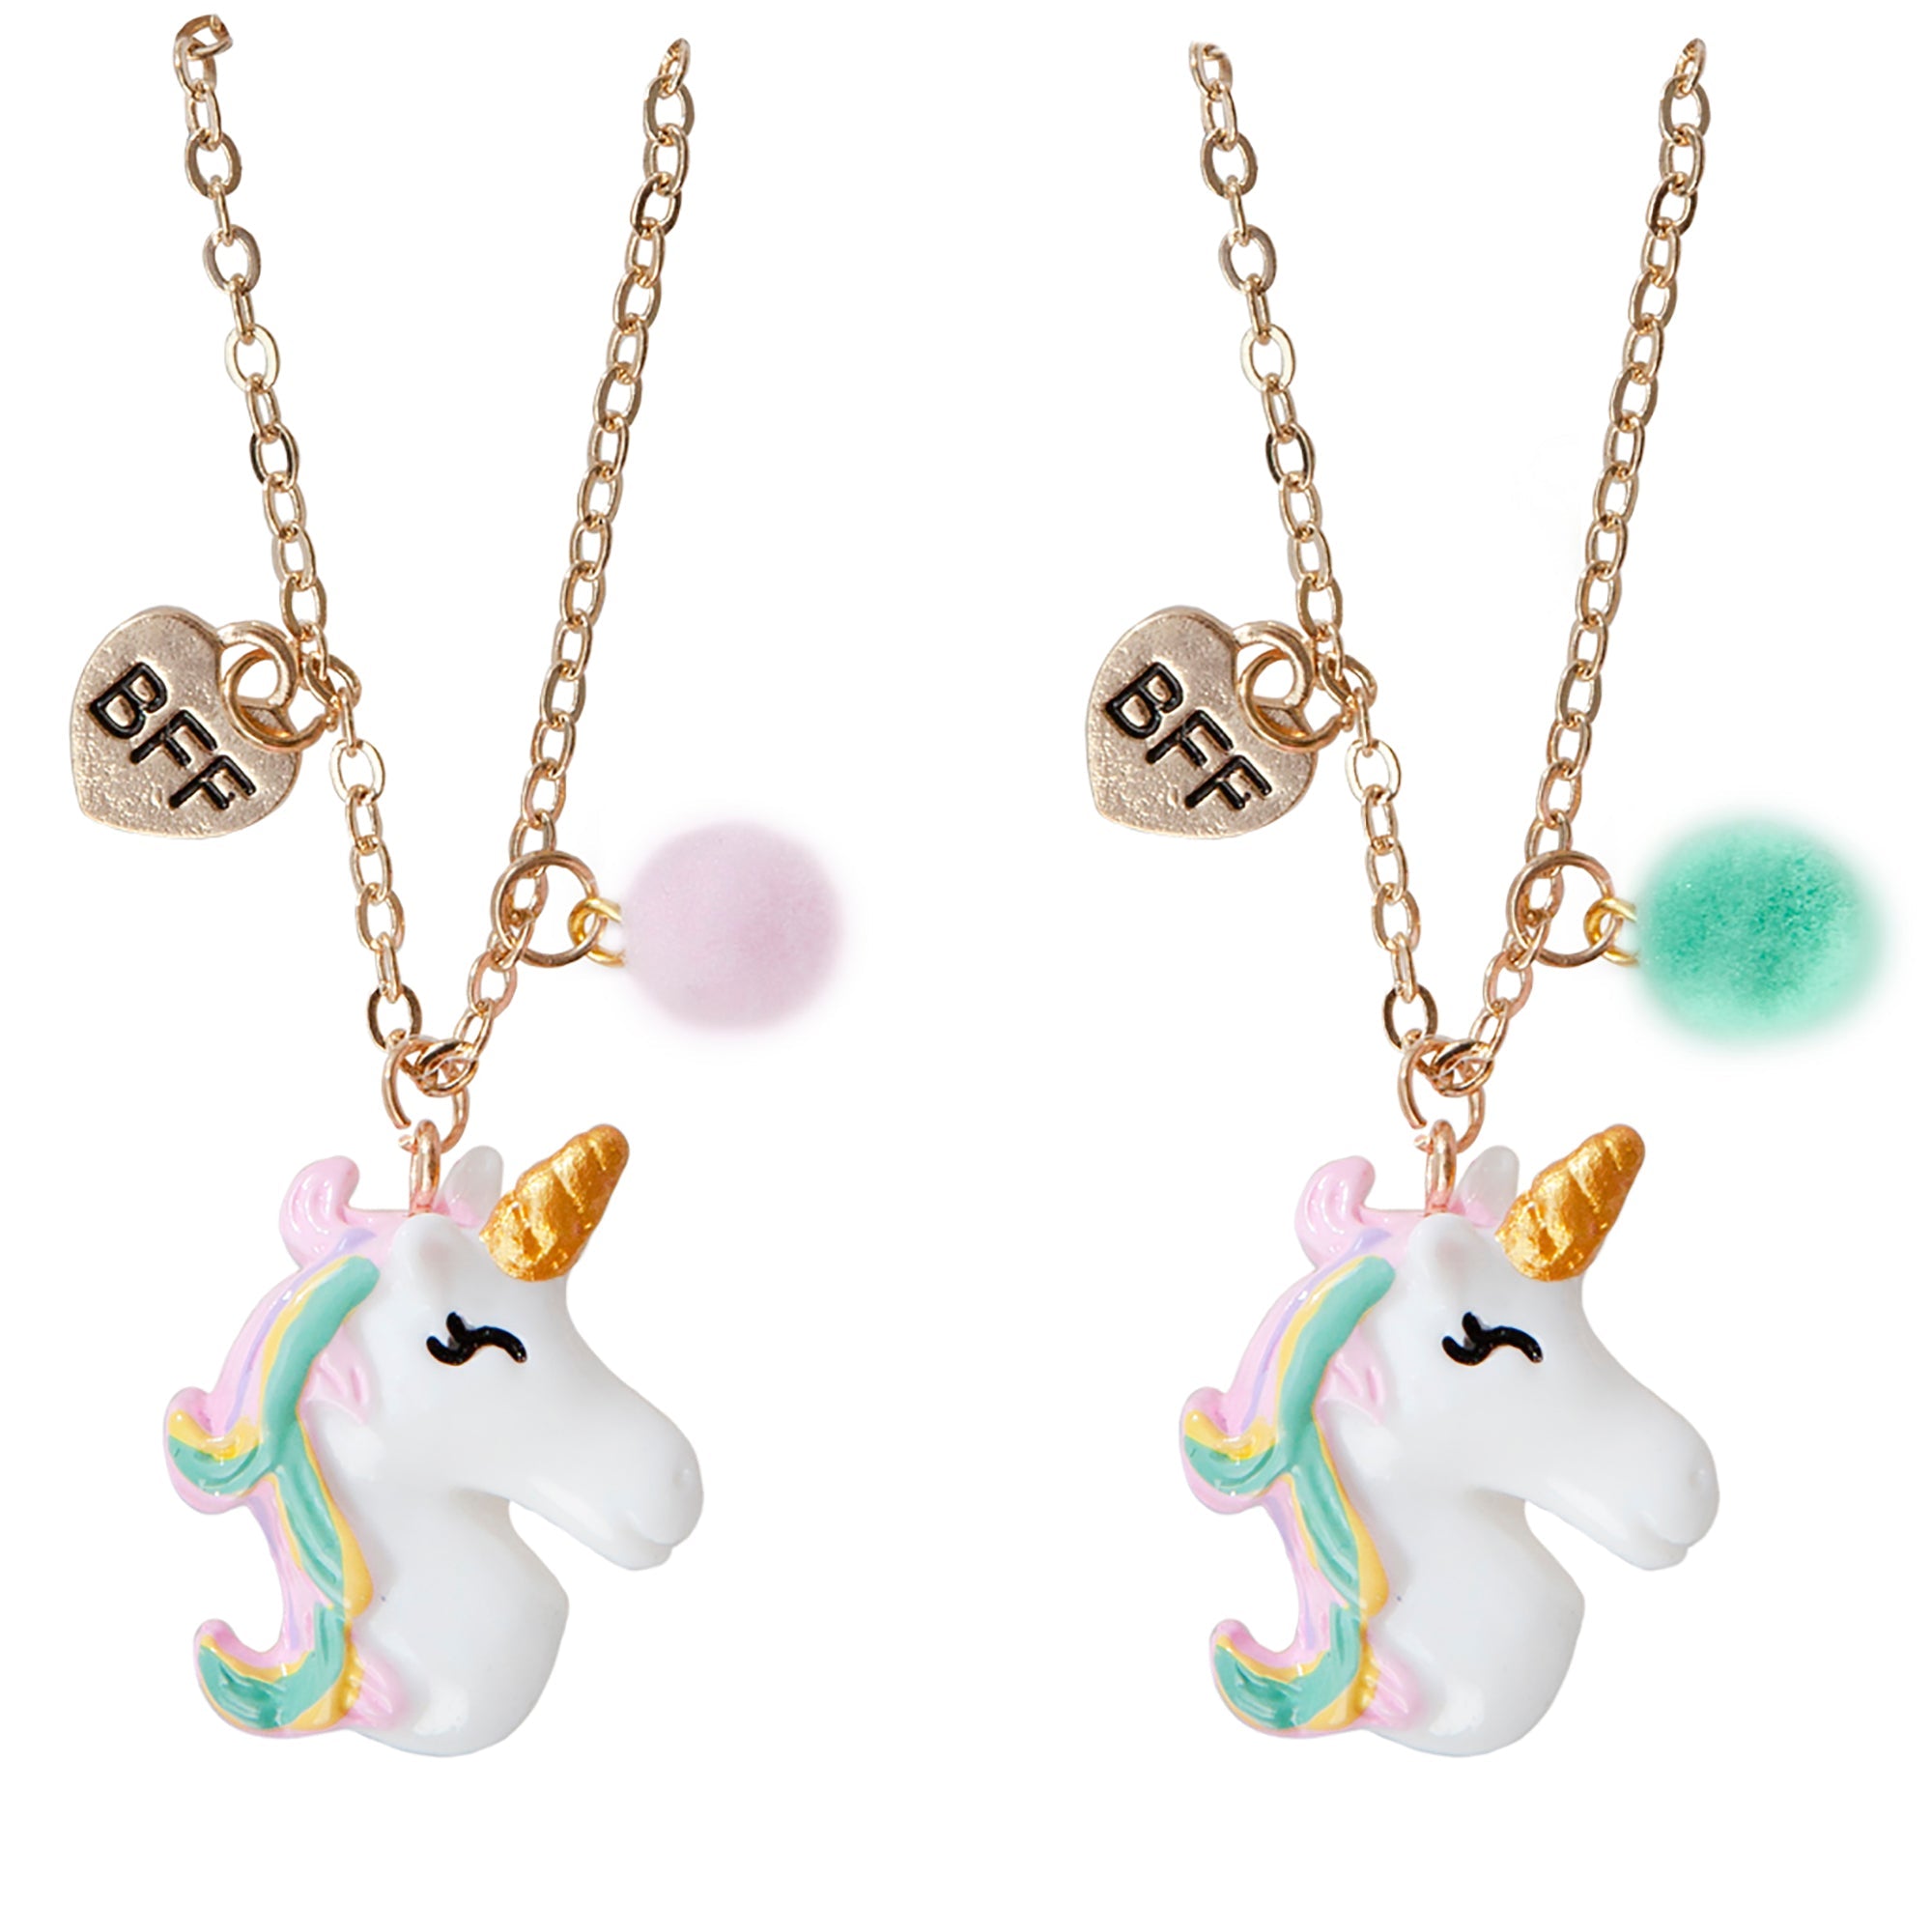 Kid's Jewelry 2pcs Unicorn BFF Necklace Set with Gold Chain